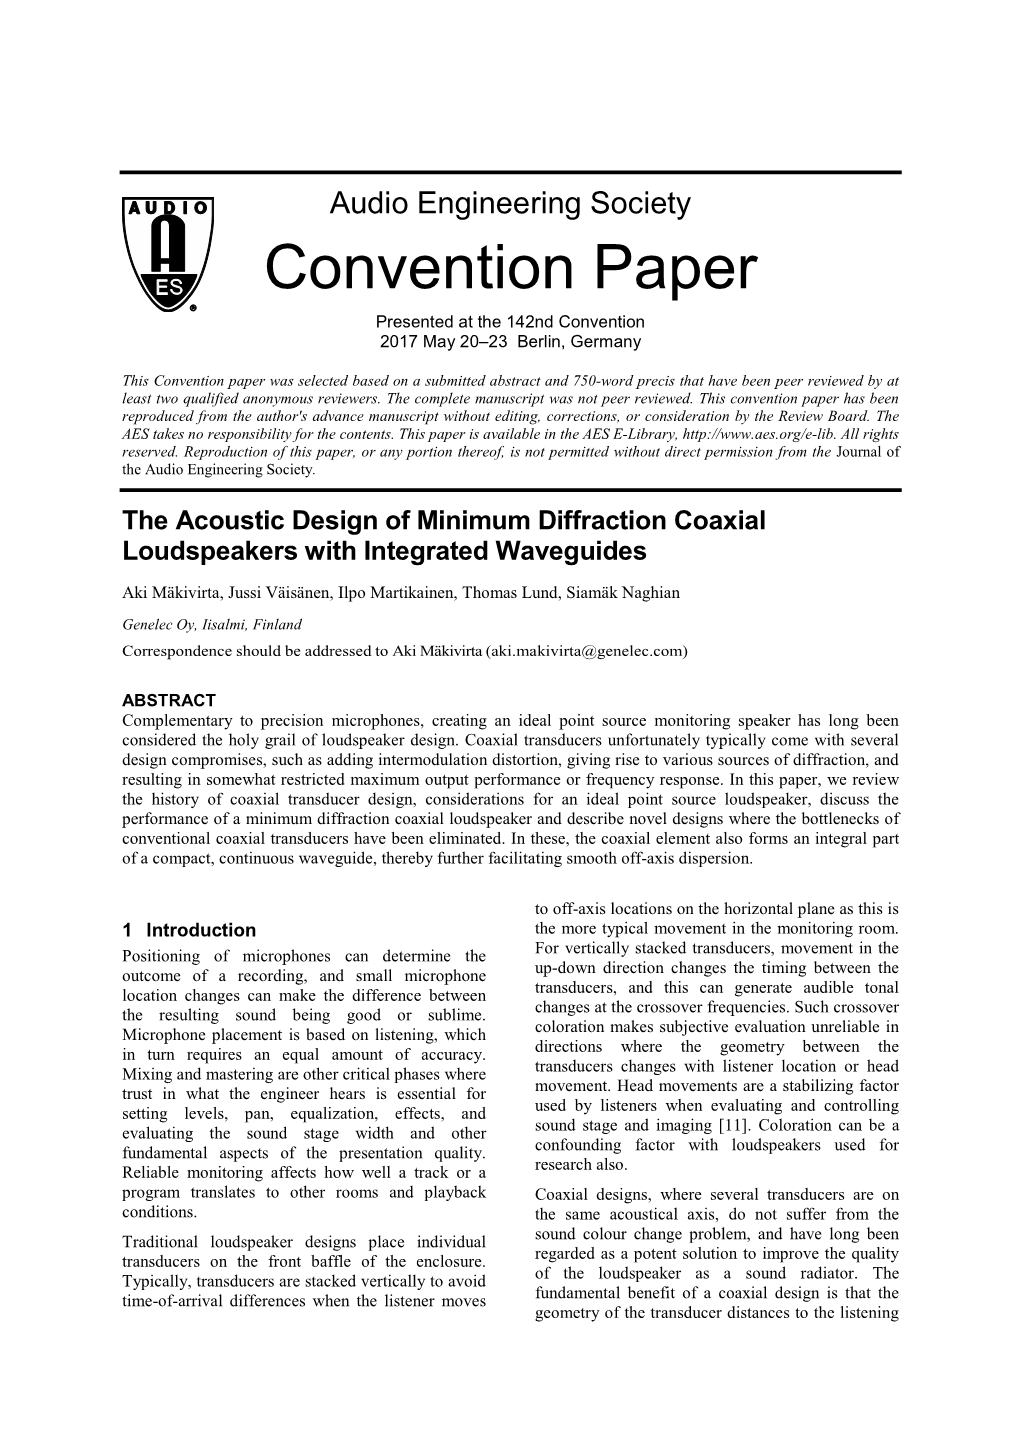 The Acoustic Design of Minimum Diffraction Coaxial Loudspeakers with Integrated Waveguides